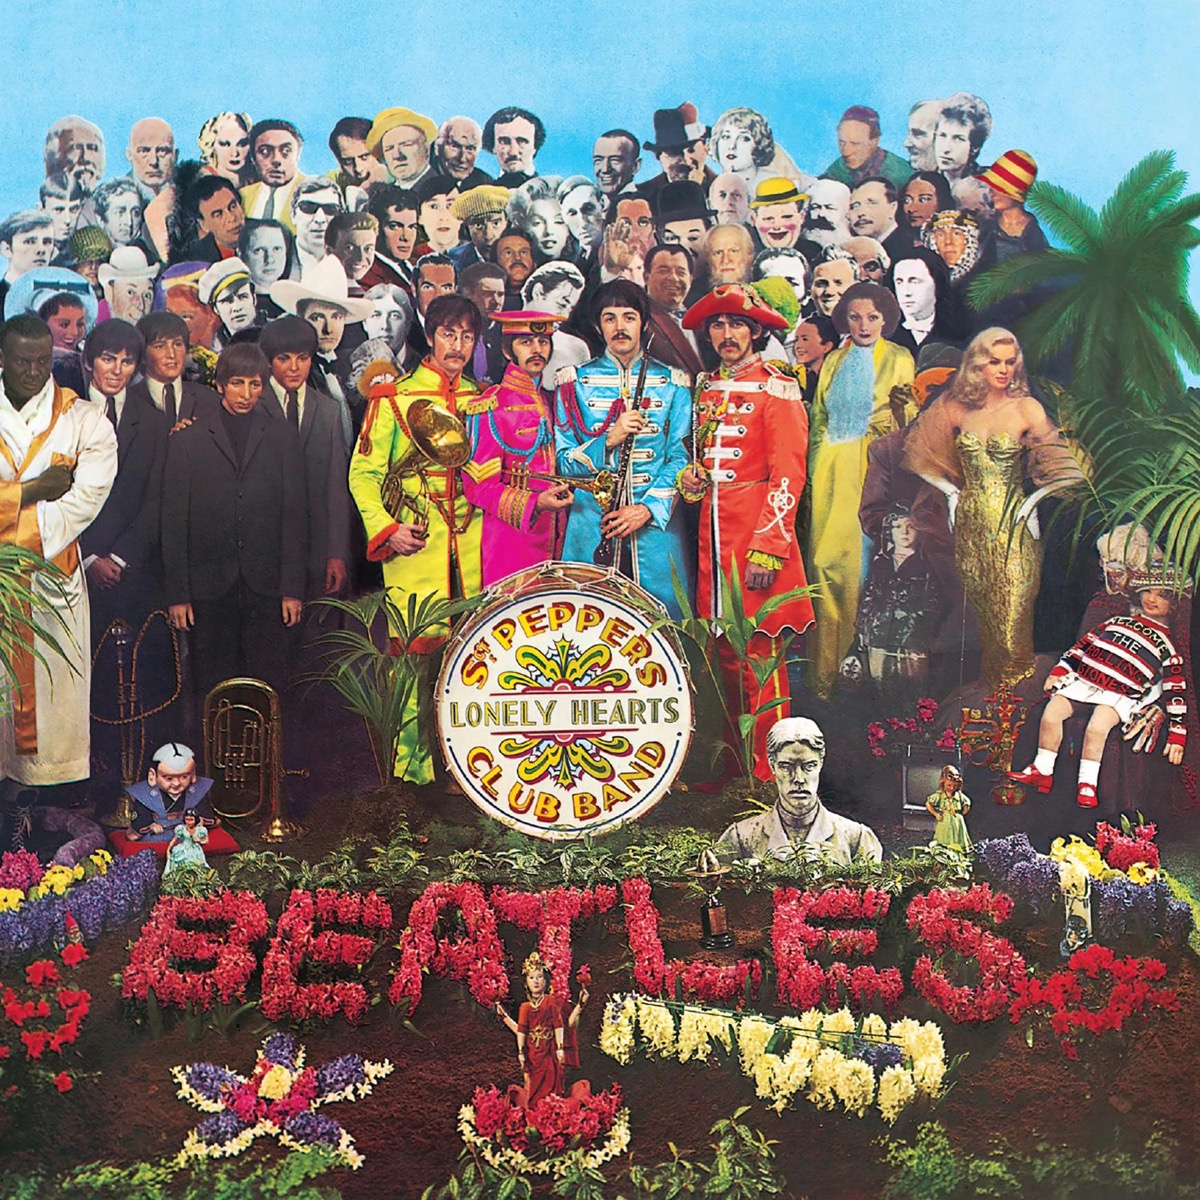 Album art for "Sgt Pepper's Lonely Hearts Club Band" by The Beatles